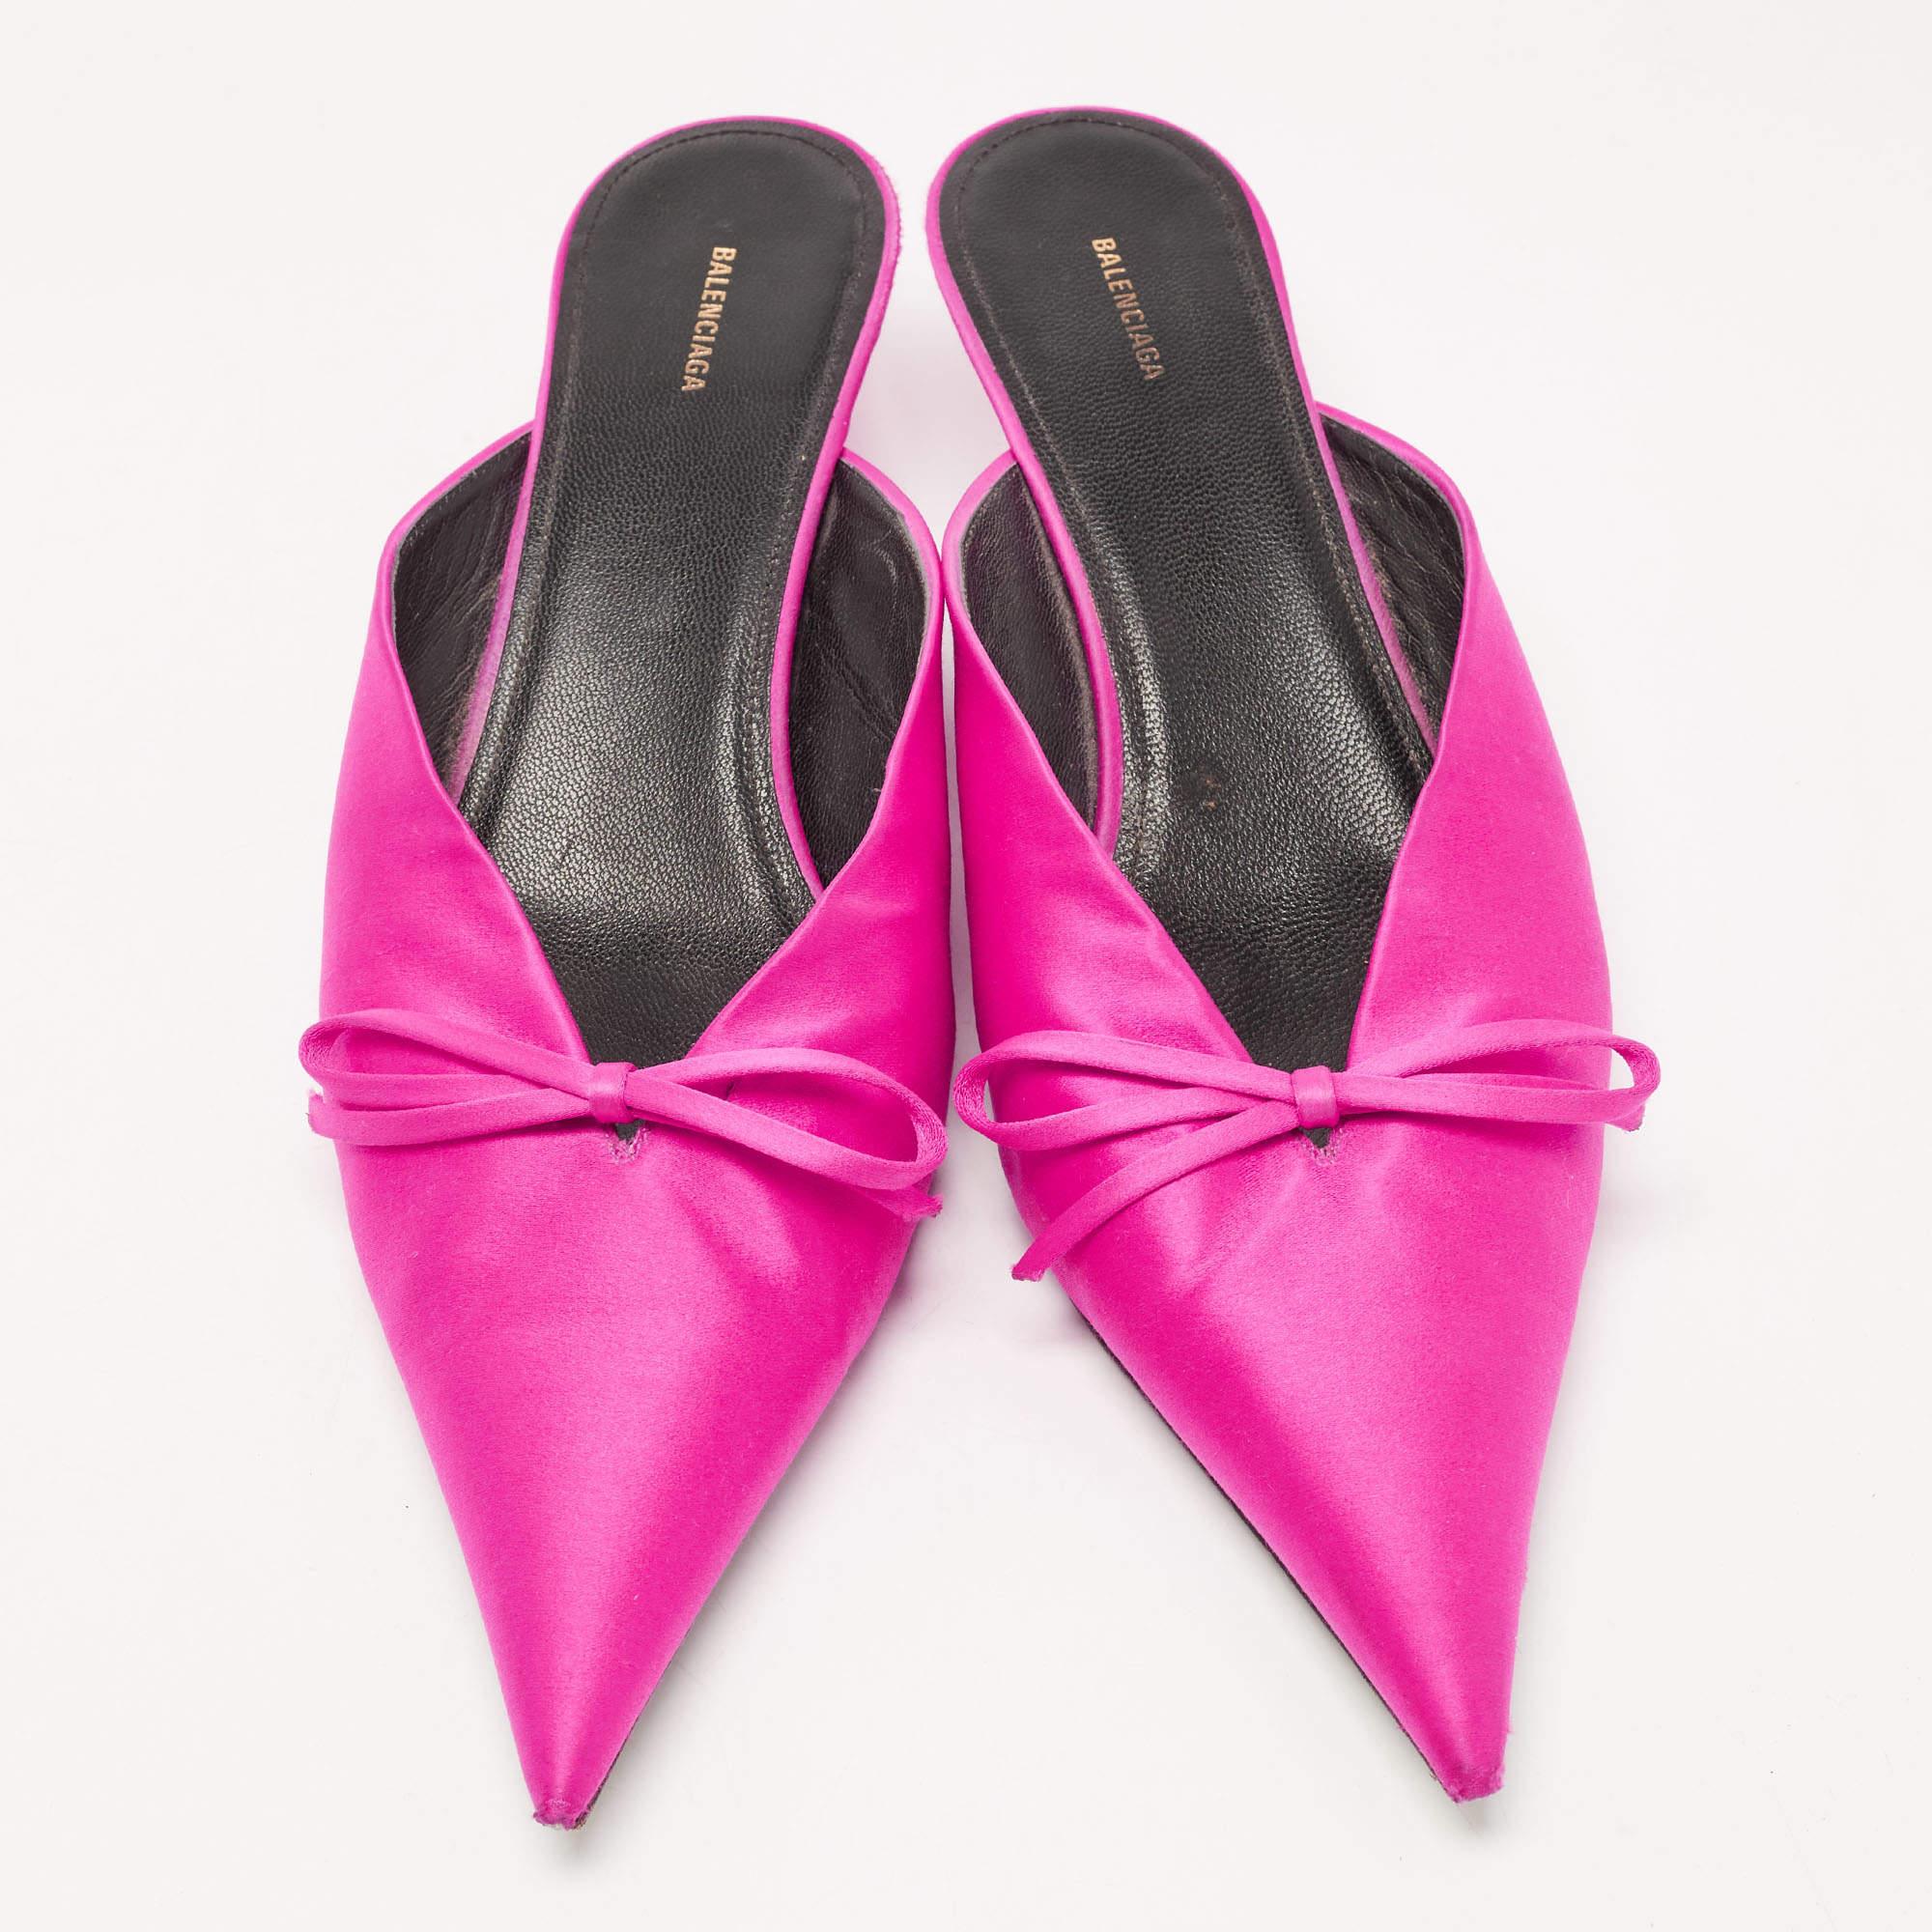 Sleek and sharp, this pair of Balenciaga mules will complement a variety of outfits in your wardrobe. The satin creation features a pink hue and a bow on the top. Elevated on 4.5cm heels, it will take your fashion statement a notch higher.

